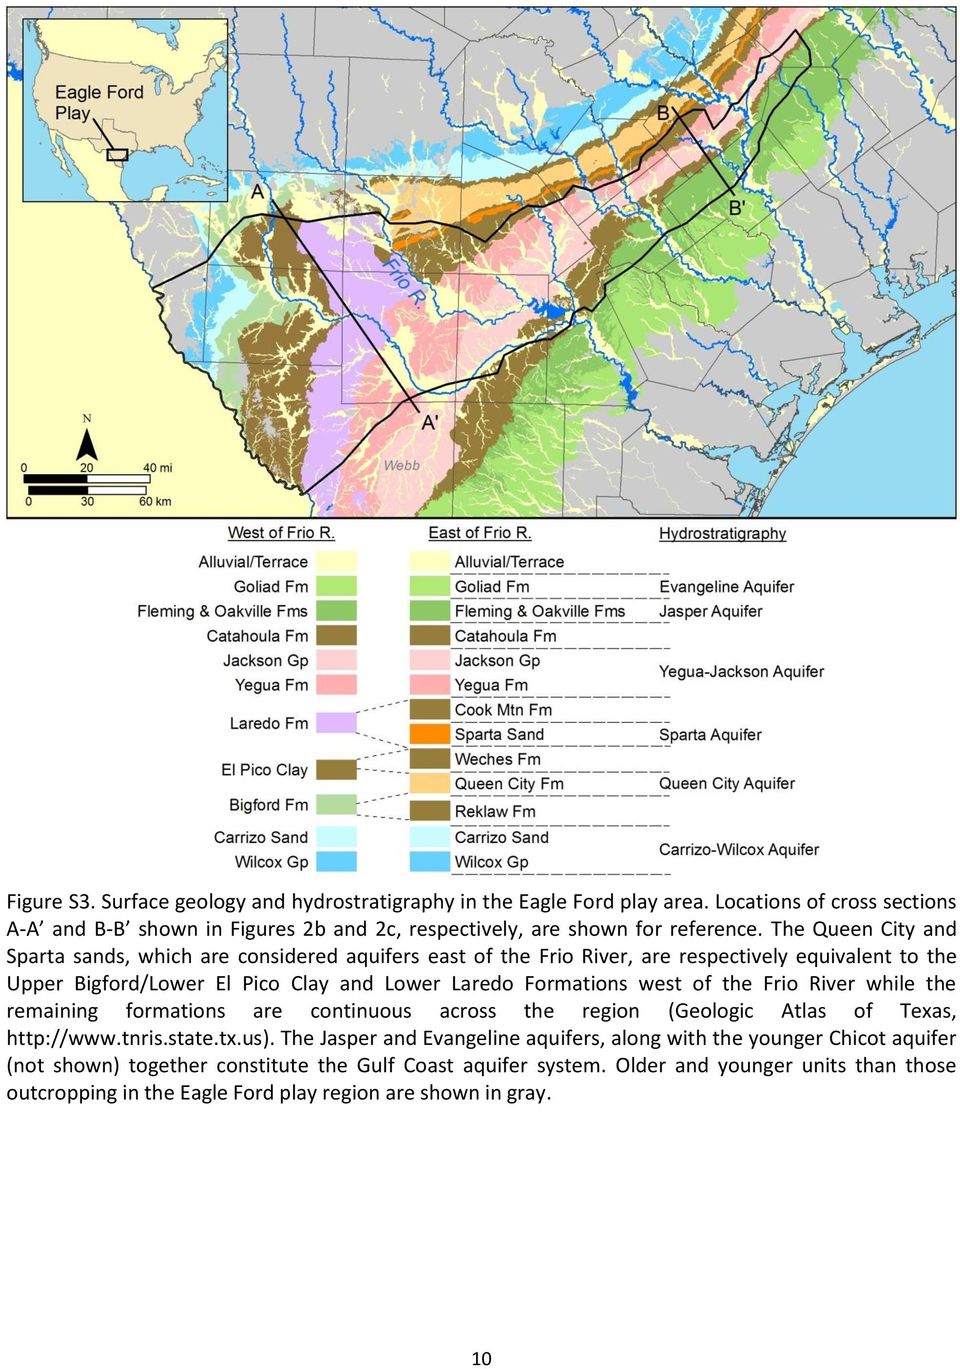 west of the Frio River while the remaining formations are continuous across the region (Geologic Atlas of Texas, http://www.tnris.state.tx.us).